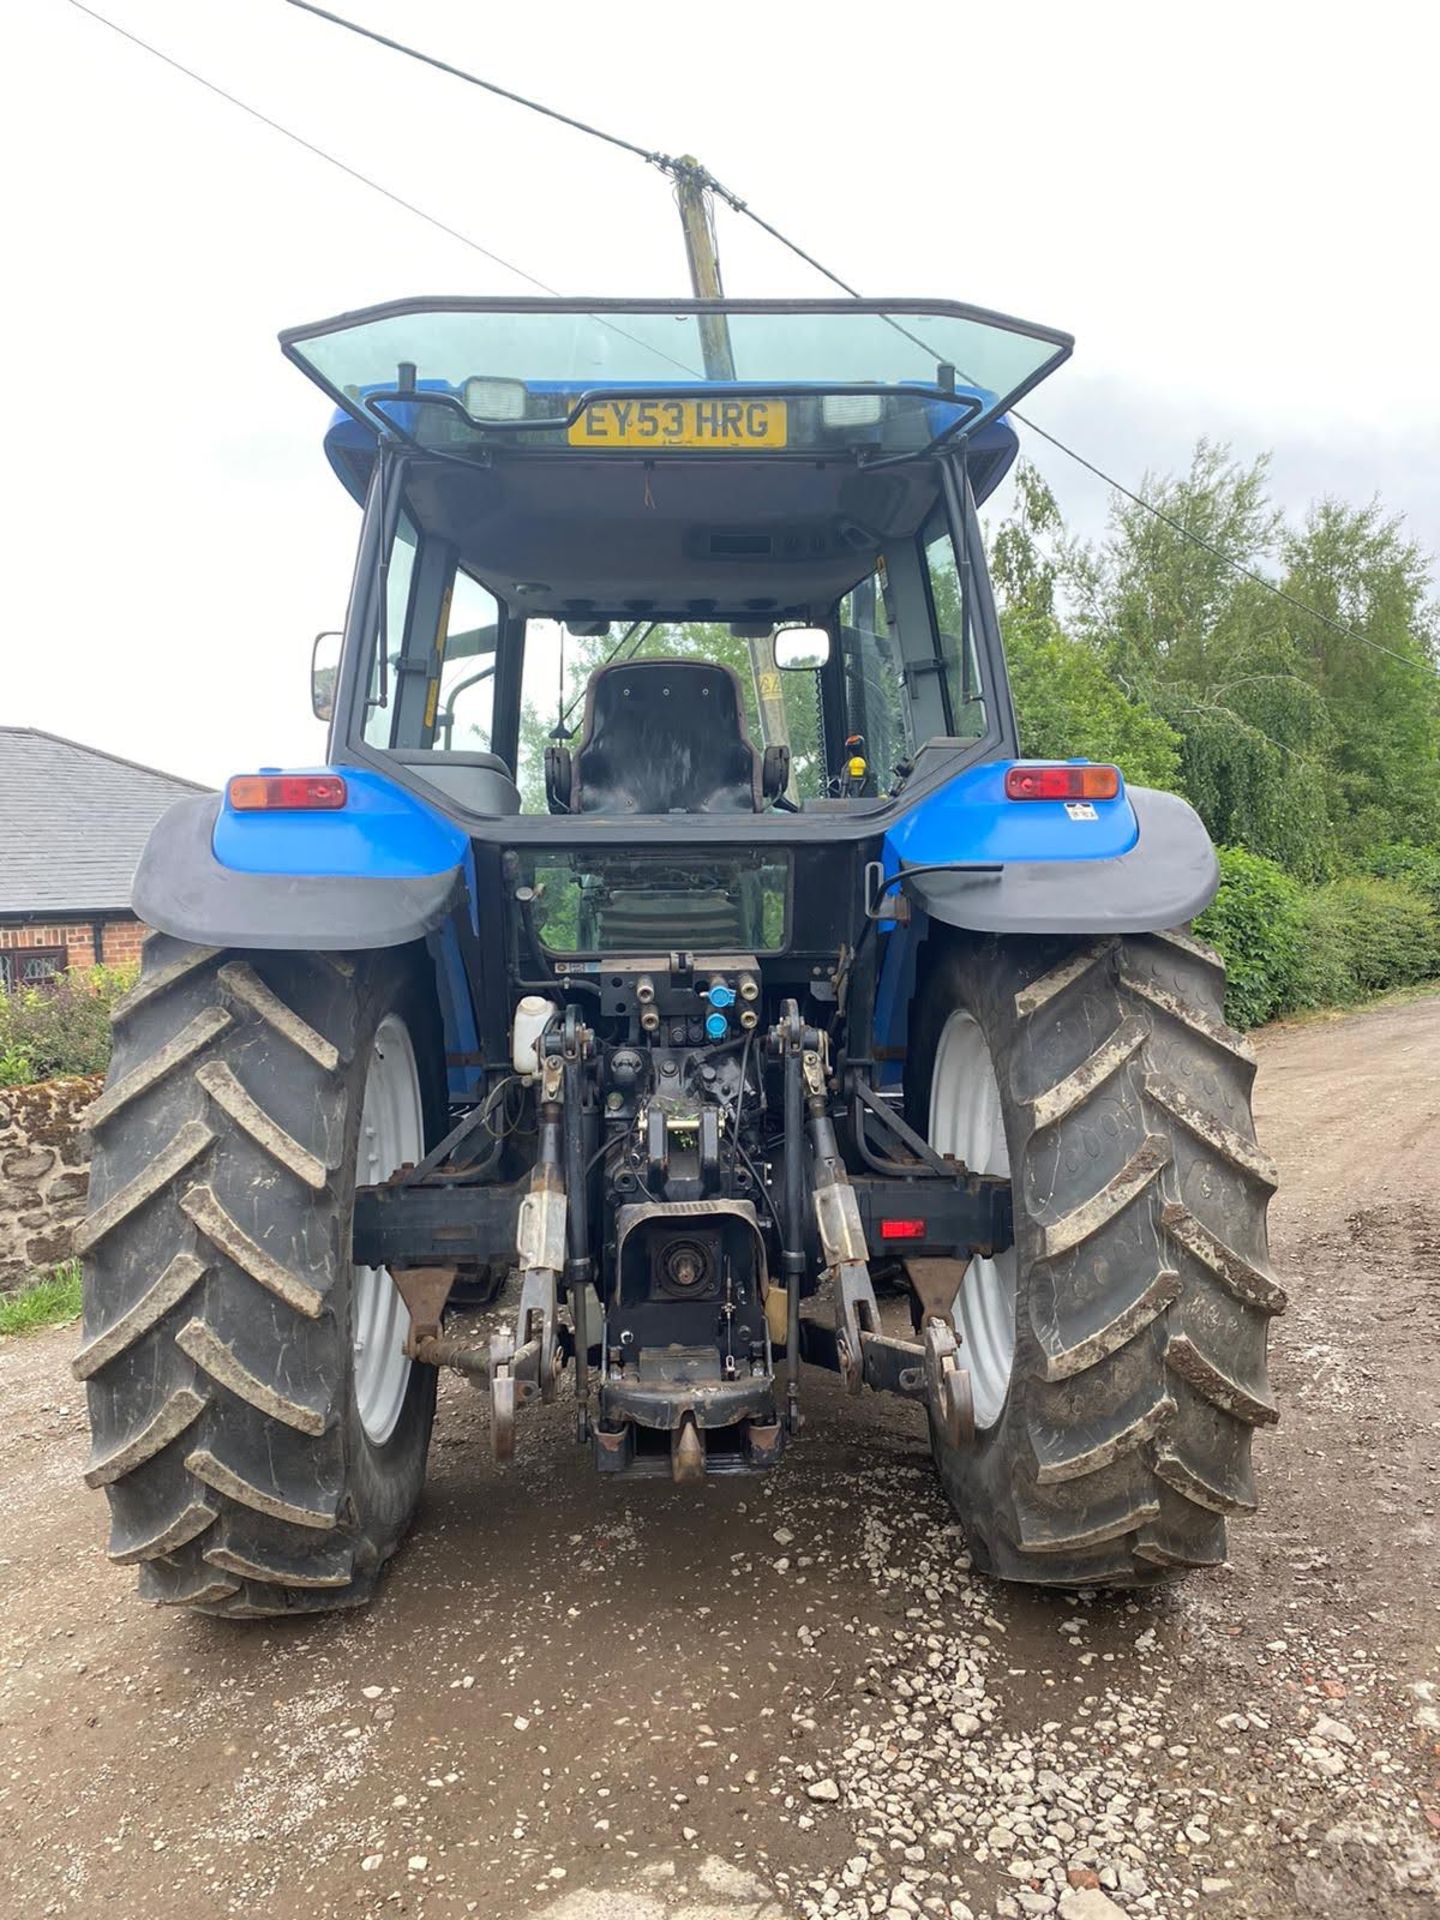 NEW HOLLAND TM120 TRACTOR, 4 WHEEL DRIVE, LOW HOURS ONLY 6128 GENUINE, MANUAL GEARBOX *PLUS VAT* - Image 5 of 10